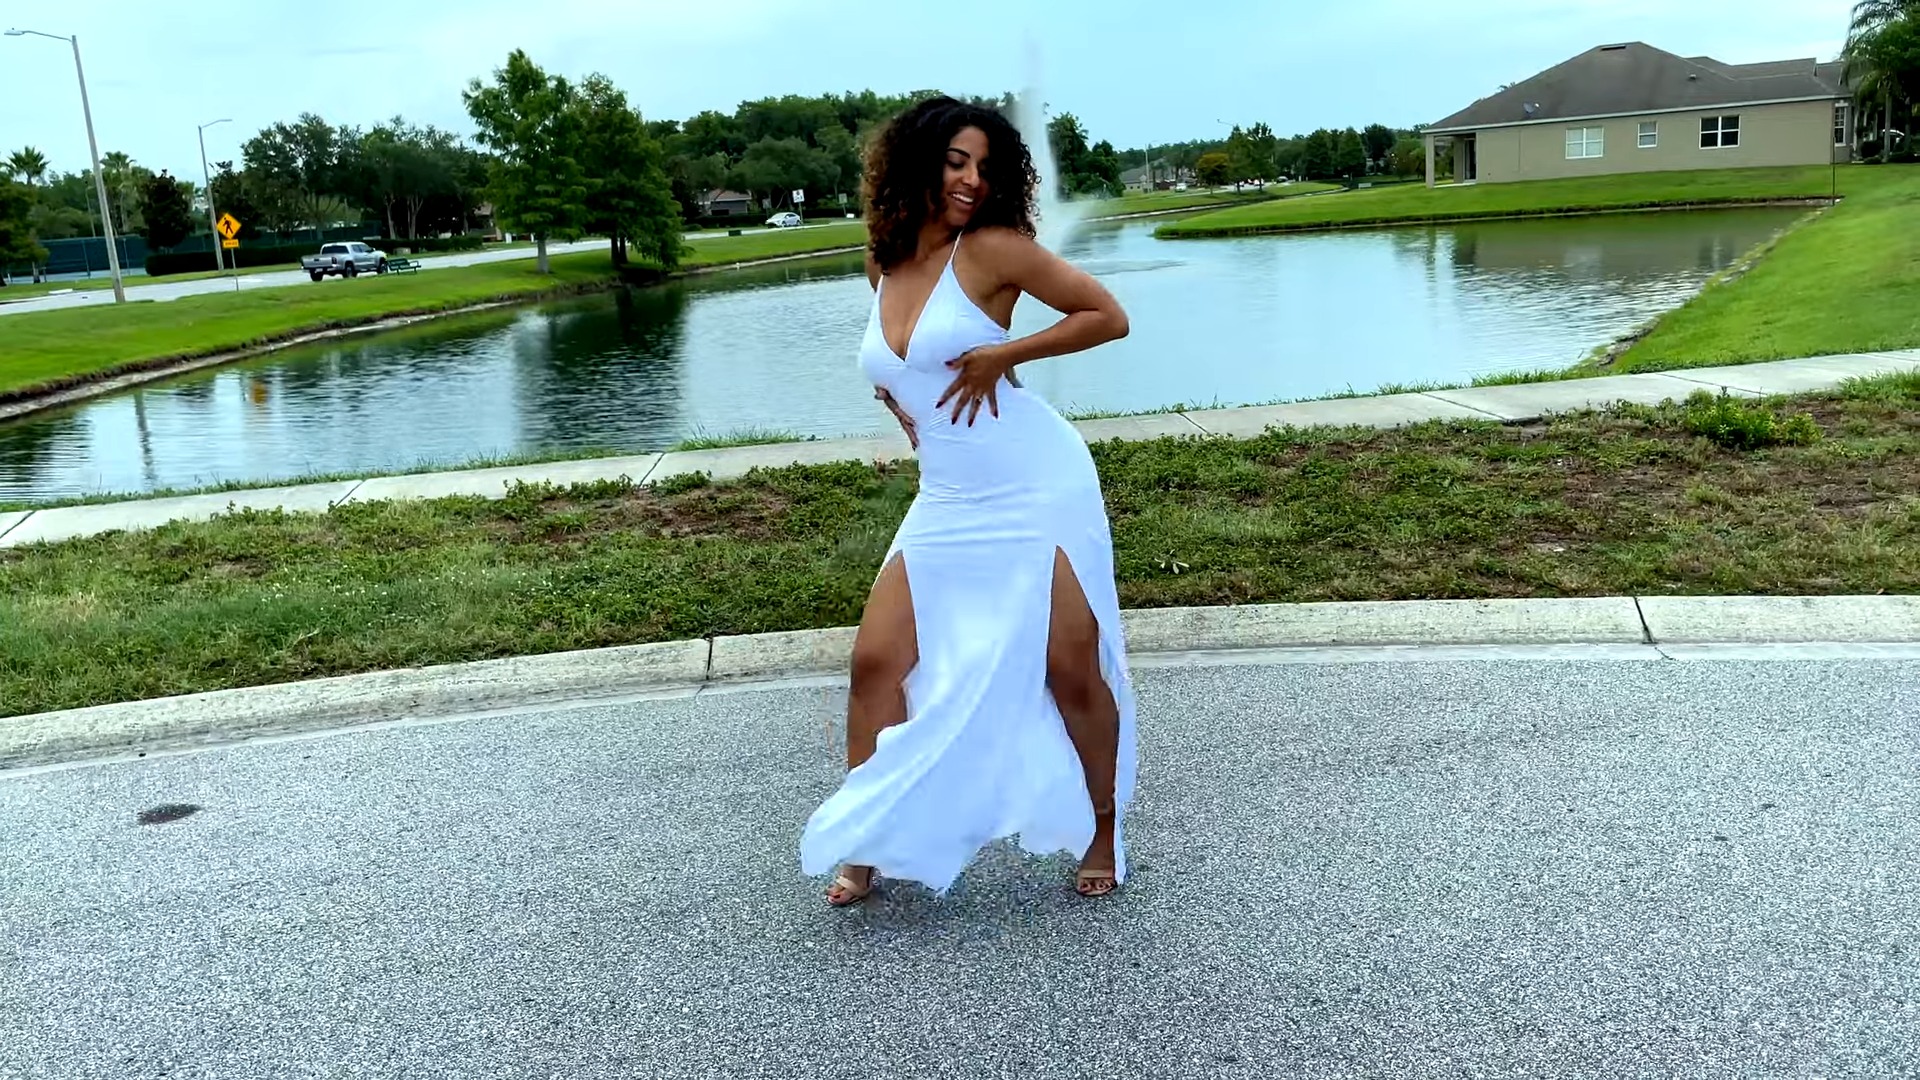 A woman in white dress dancing bachata outisde near a pond with green lawn